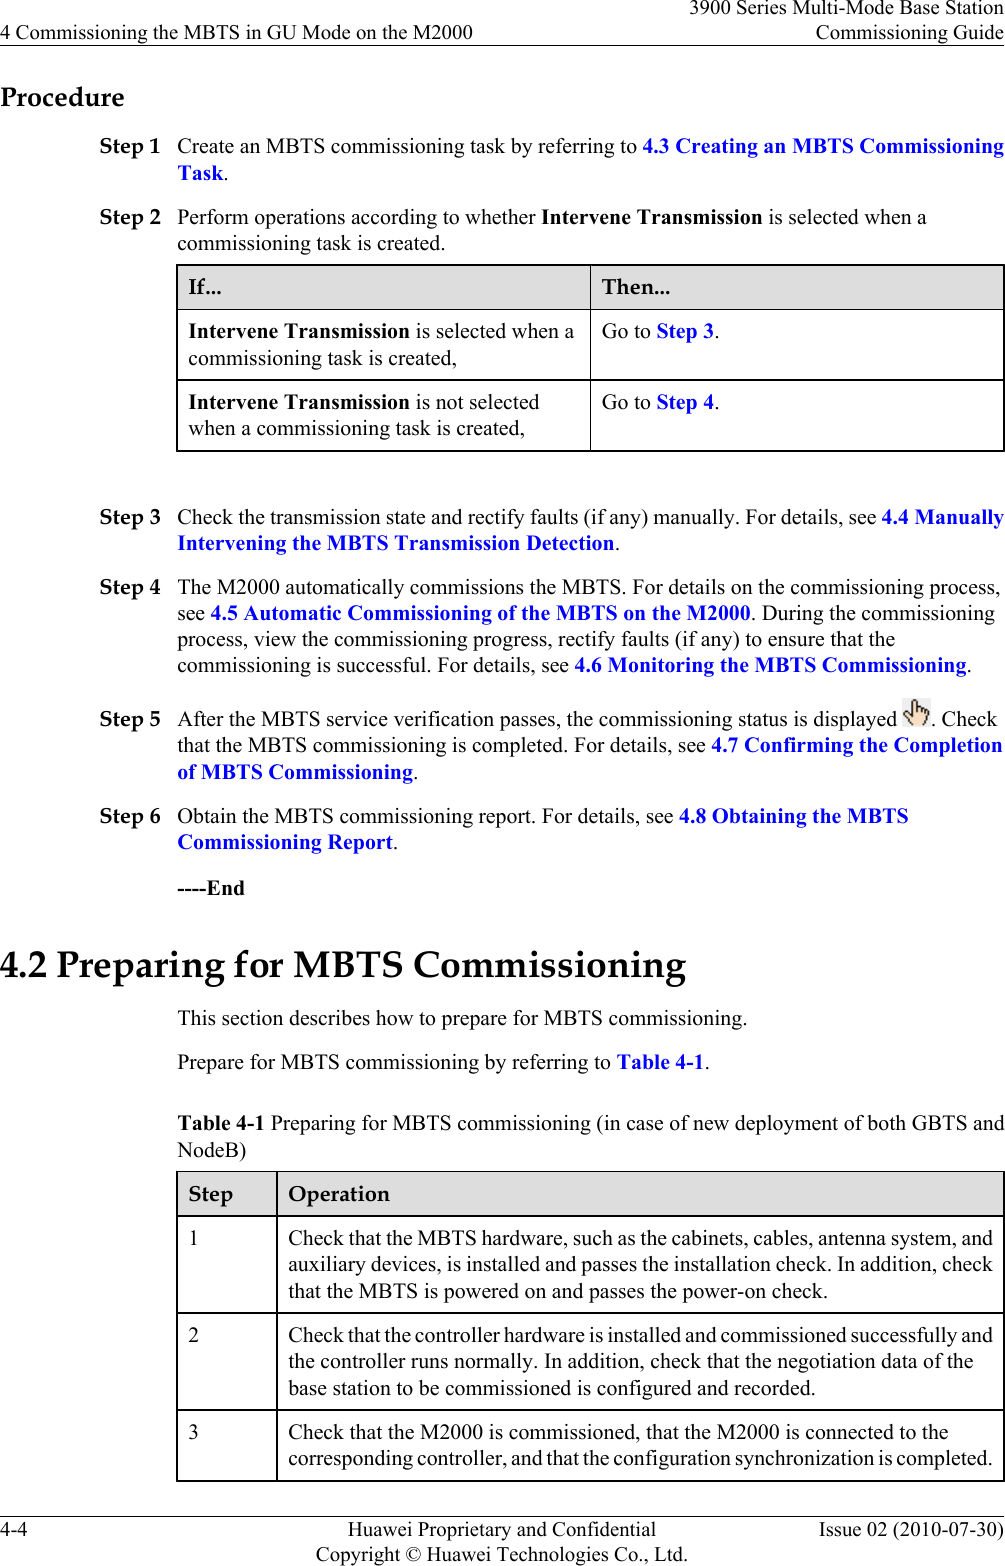 ProcedureStep 1 Create an MBTS commissioning task by referring to 4.3 Creating an MBTS CommissioningTask.Step 2 Perform operations according to whether Intervene Transmission is selected when acommissioning task is created.If... Then...Intervene Transmission is selected when acommissioning task is created,Go to Step 3.Intervene Transmission is not selectedwhen a commissioning task is created,Go to Step 4. Step 3 Check the transmission state and rectify faults (if any) manually. For details, see 4.4 ManuallyIntervening the MBTS Transmission Detection.Step 4 The M2000 automatically commissions the MBTS. For details on the commissioning process,see 4.5 Automatic Commissioning of the MBTS on the M2000. During the commissioningprocess, view the commissioning progress, rectify faults (if any) to ensure that thecommissioning is successful. For details, see 4.6 Monitoring the MBTS Commissioning.Step 5 After the MBTS service verification passes, the commissioning status is displayed  . Checkthat the MBTS commissioning is completed. For details, see 4.7 Confirming the Completionof MBTS Commissioning.Step 6 Obtain the MBTS commissioning report. For details, see 4.8 Obtaining the MBTSCommissioning Report.----End4.2 Preparing for MBTS CommissioningThis section describes how to prepare for MBTS commissioning.Prepare for MBTS commissioning by referring to Table 4-1.Table 4-1 Preparing for MBTS commissioning (in case of new deployment of both GBTS andNodeB)Step Operation1Check that the MBTS hardware, such as the cabinets, cables, antenna system, andauxiliary devices, is installed and passes the installation check. In addition, checkthat the MBTS is powered on and passes the power-on check.2 Check that the controller hardware is installed and commissioned successfully andthe controller runs normally. In addition, check that the negotiation data of thebase station to be commissioned is configured and recorded.3 Check that the M2000 is commissioned, that the M2000 is connected to thecorresponding controller, and that the configuration synchronization is completed.4 Commissioning the MBTS in GU Mode on the M20003900 Series Multi-Mode Base StationCommissioning Guide4-4 Huawei Proprietary and ConfidentialCopyright © Huawei Technologies Co., Ltd.Issue 02 (2010-07-30)